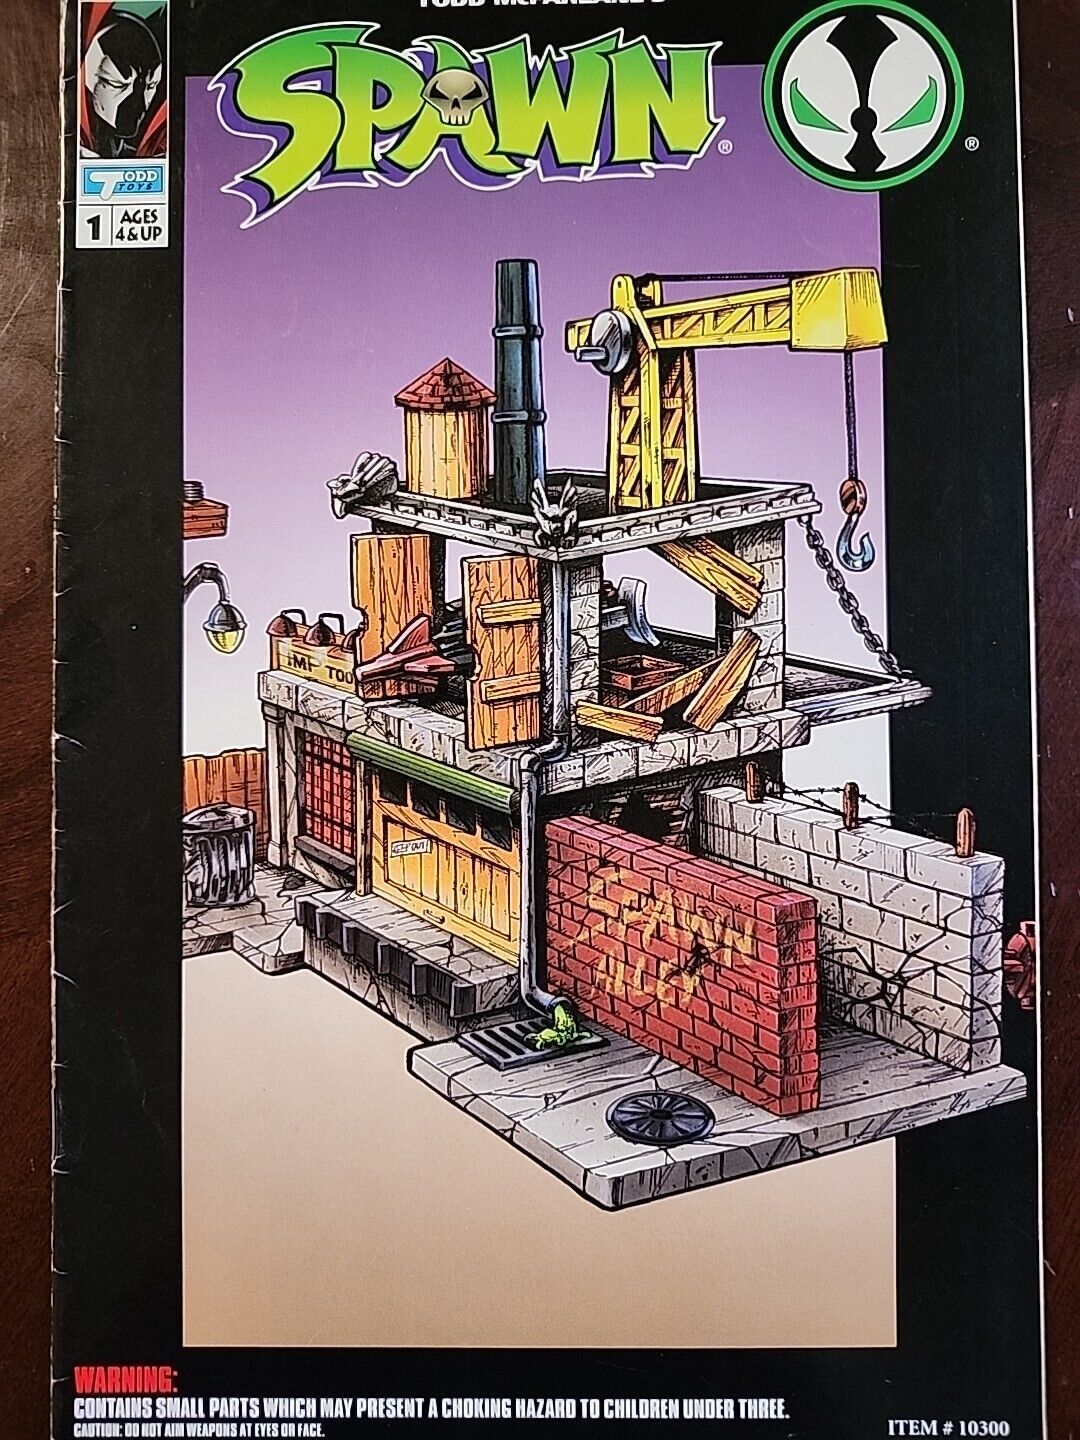 Spawn Alley Action Play Set Comic